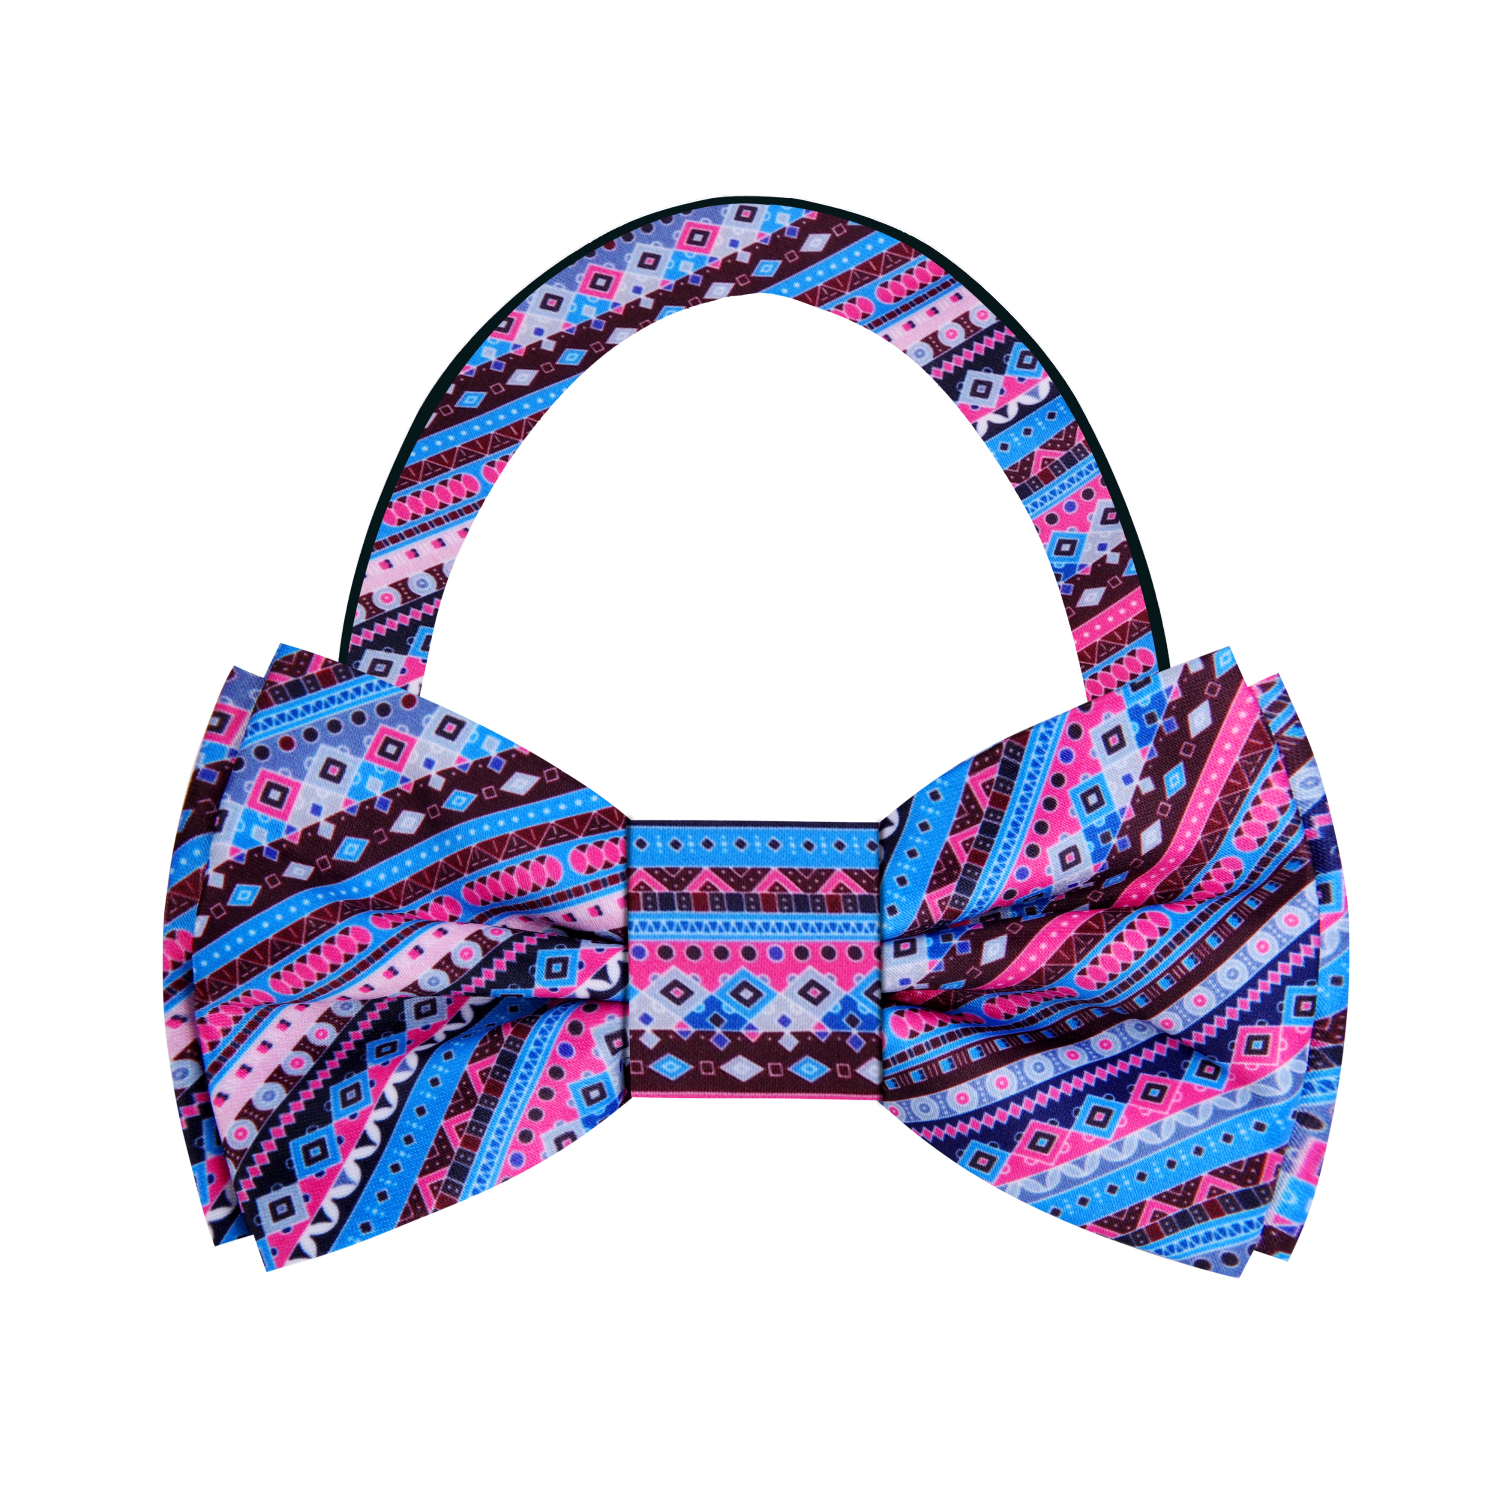 Shades of Blue and Pink Panoramic Bow Tie Pre Tied